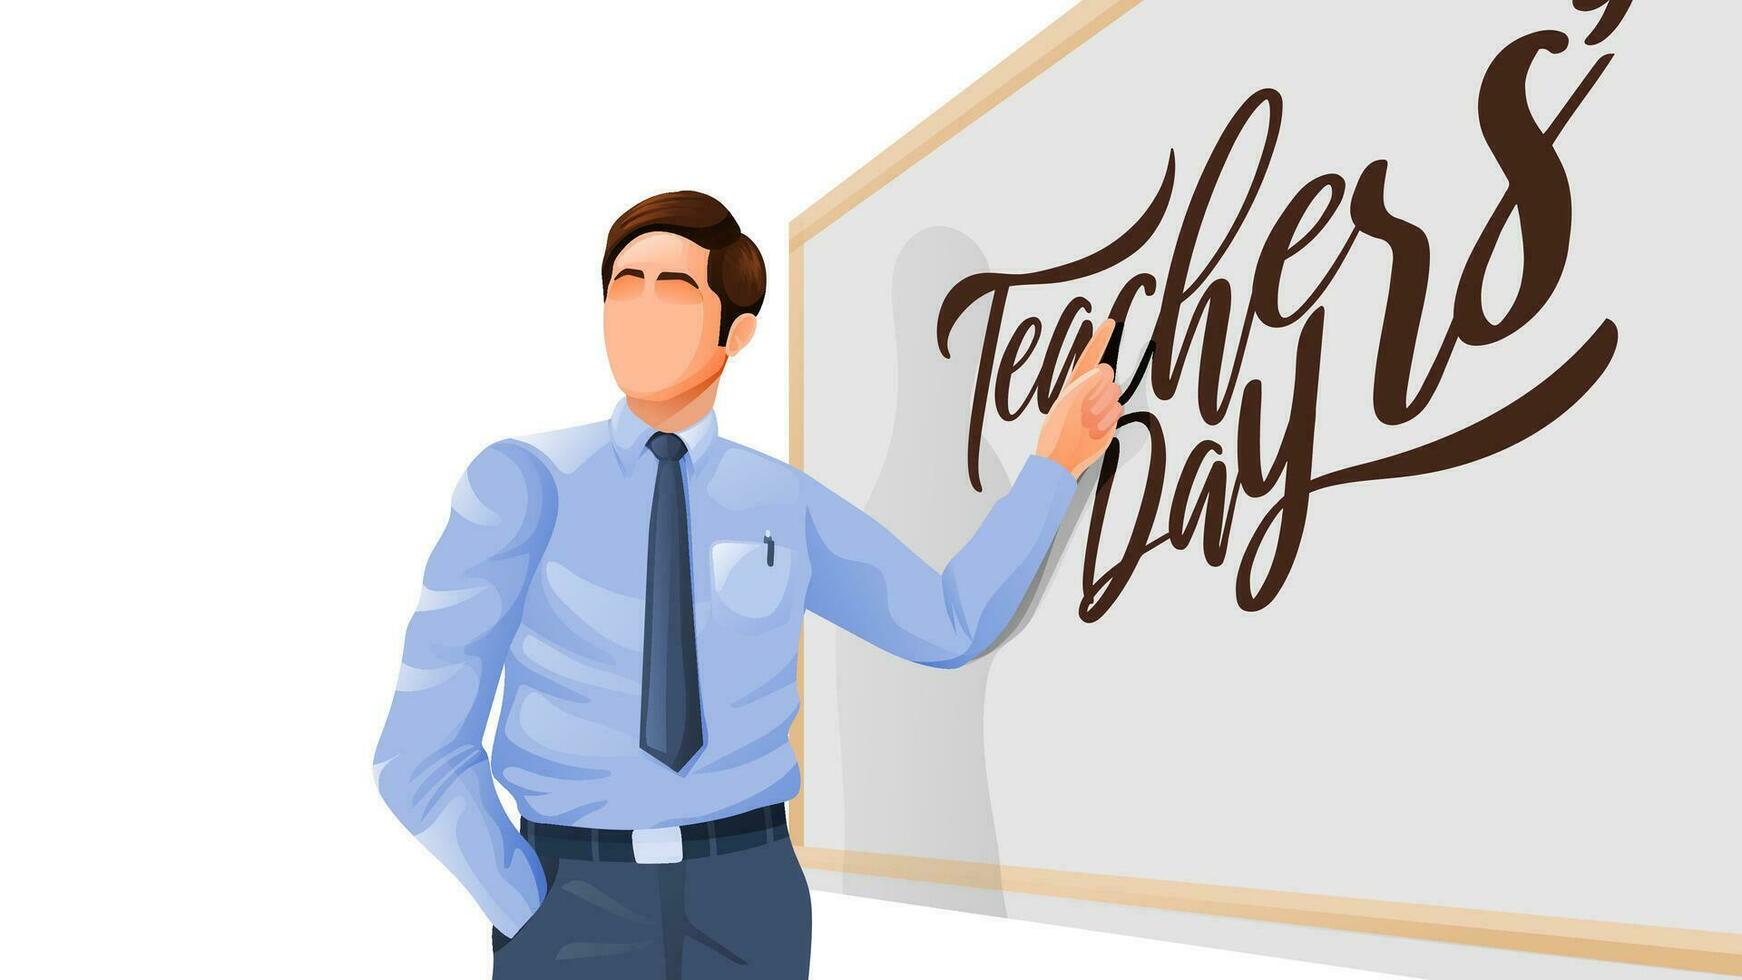 Teachers Day Banner With Teacher Character Pointing Calligraphy on White Board Illustration vector